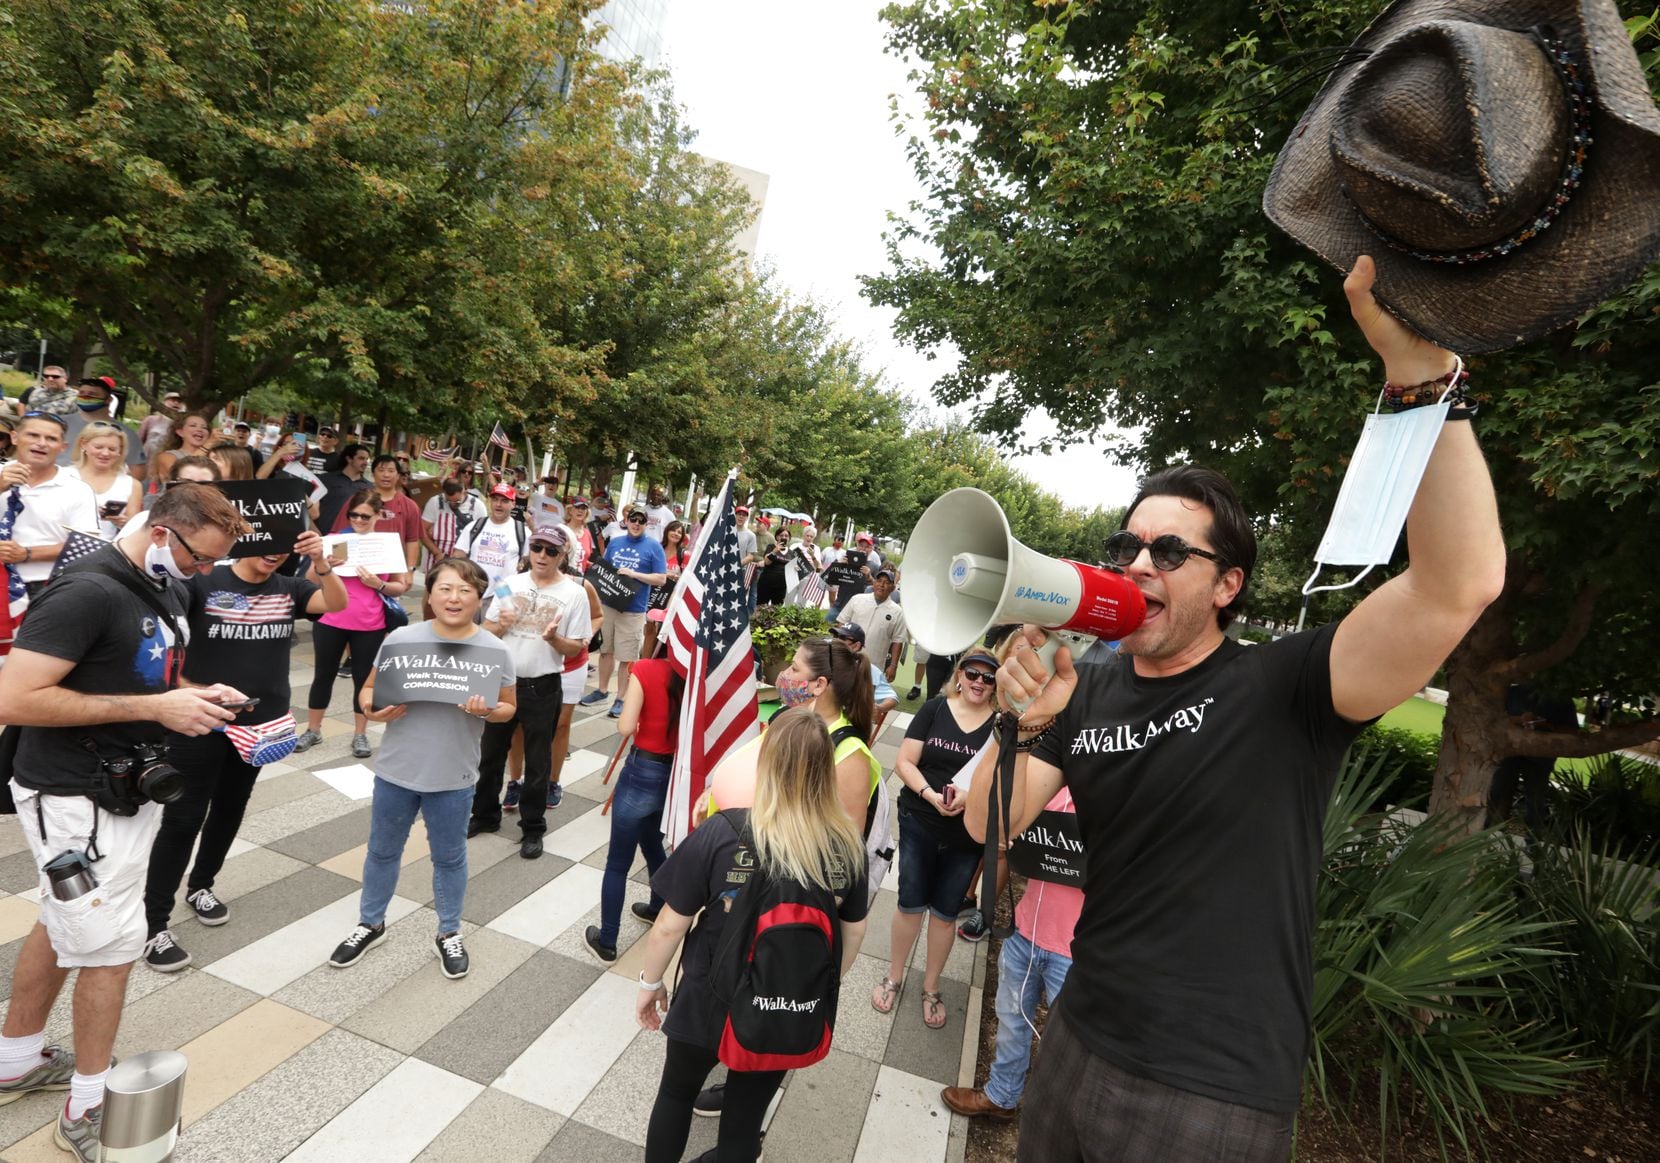 Brandon Straka (right), founder of the #WalkAway Campaign movement, and demonstrators get...